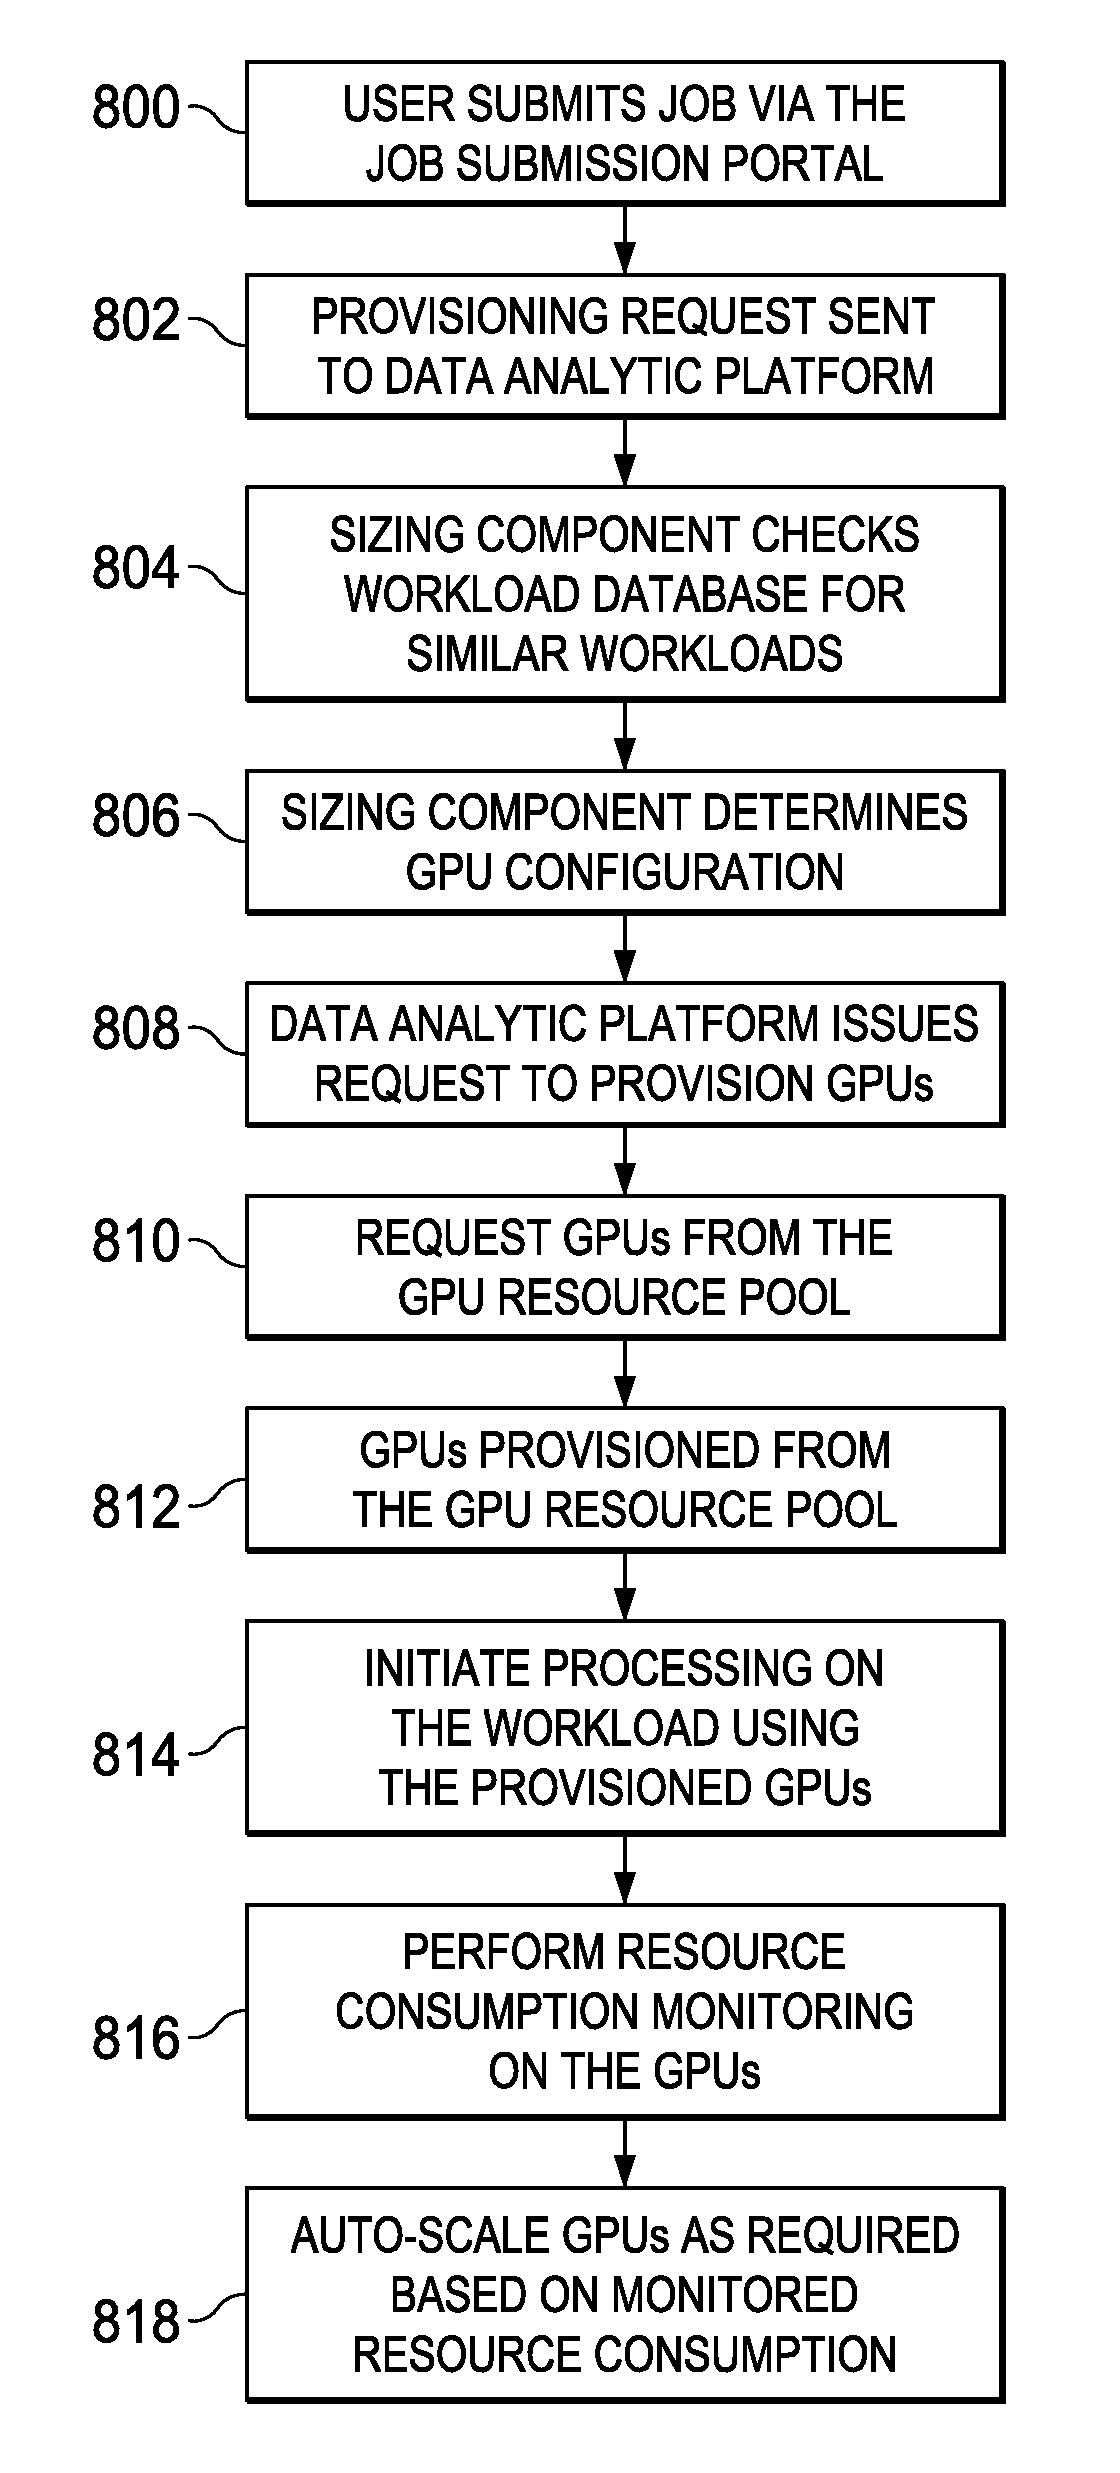 Dynamically provisioning and scaling graphic processing units for data analytic workloads in a hardware cloud